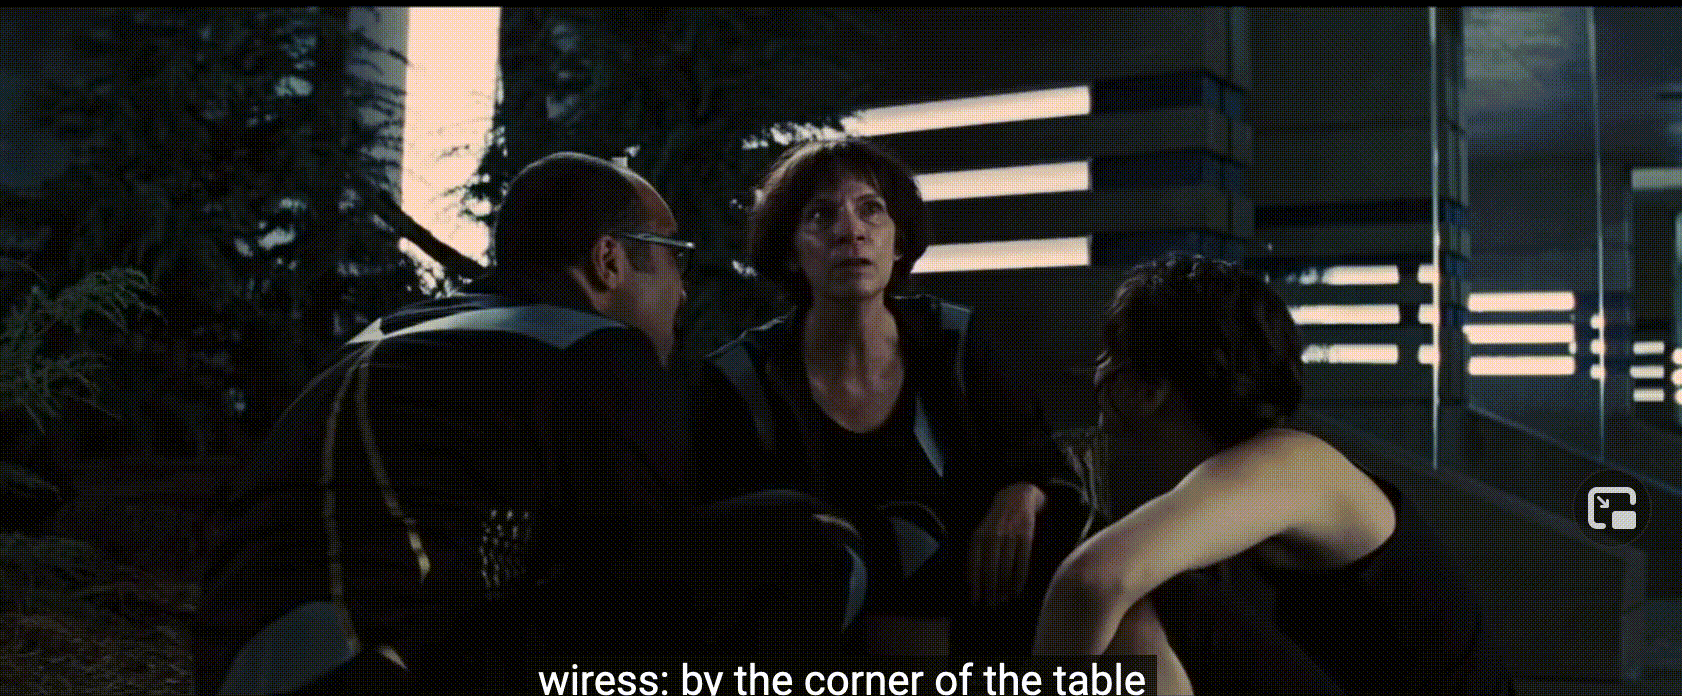 A GIF from Catching Fire, Katniss is speaking to Beetee Latier and Wiress. Wiress points out something by the corner of the table near Plutarch. Beetee comments he can see a force field, on the top left side. Katniss looks on struggling to see it however, Beetee continues to explain he can see a glass like texture.  Wiress points out it is to separate "us and them" while Katnis acknowledges it is likely her doing.